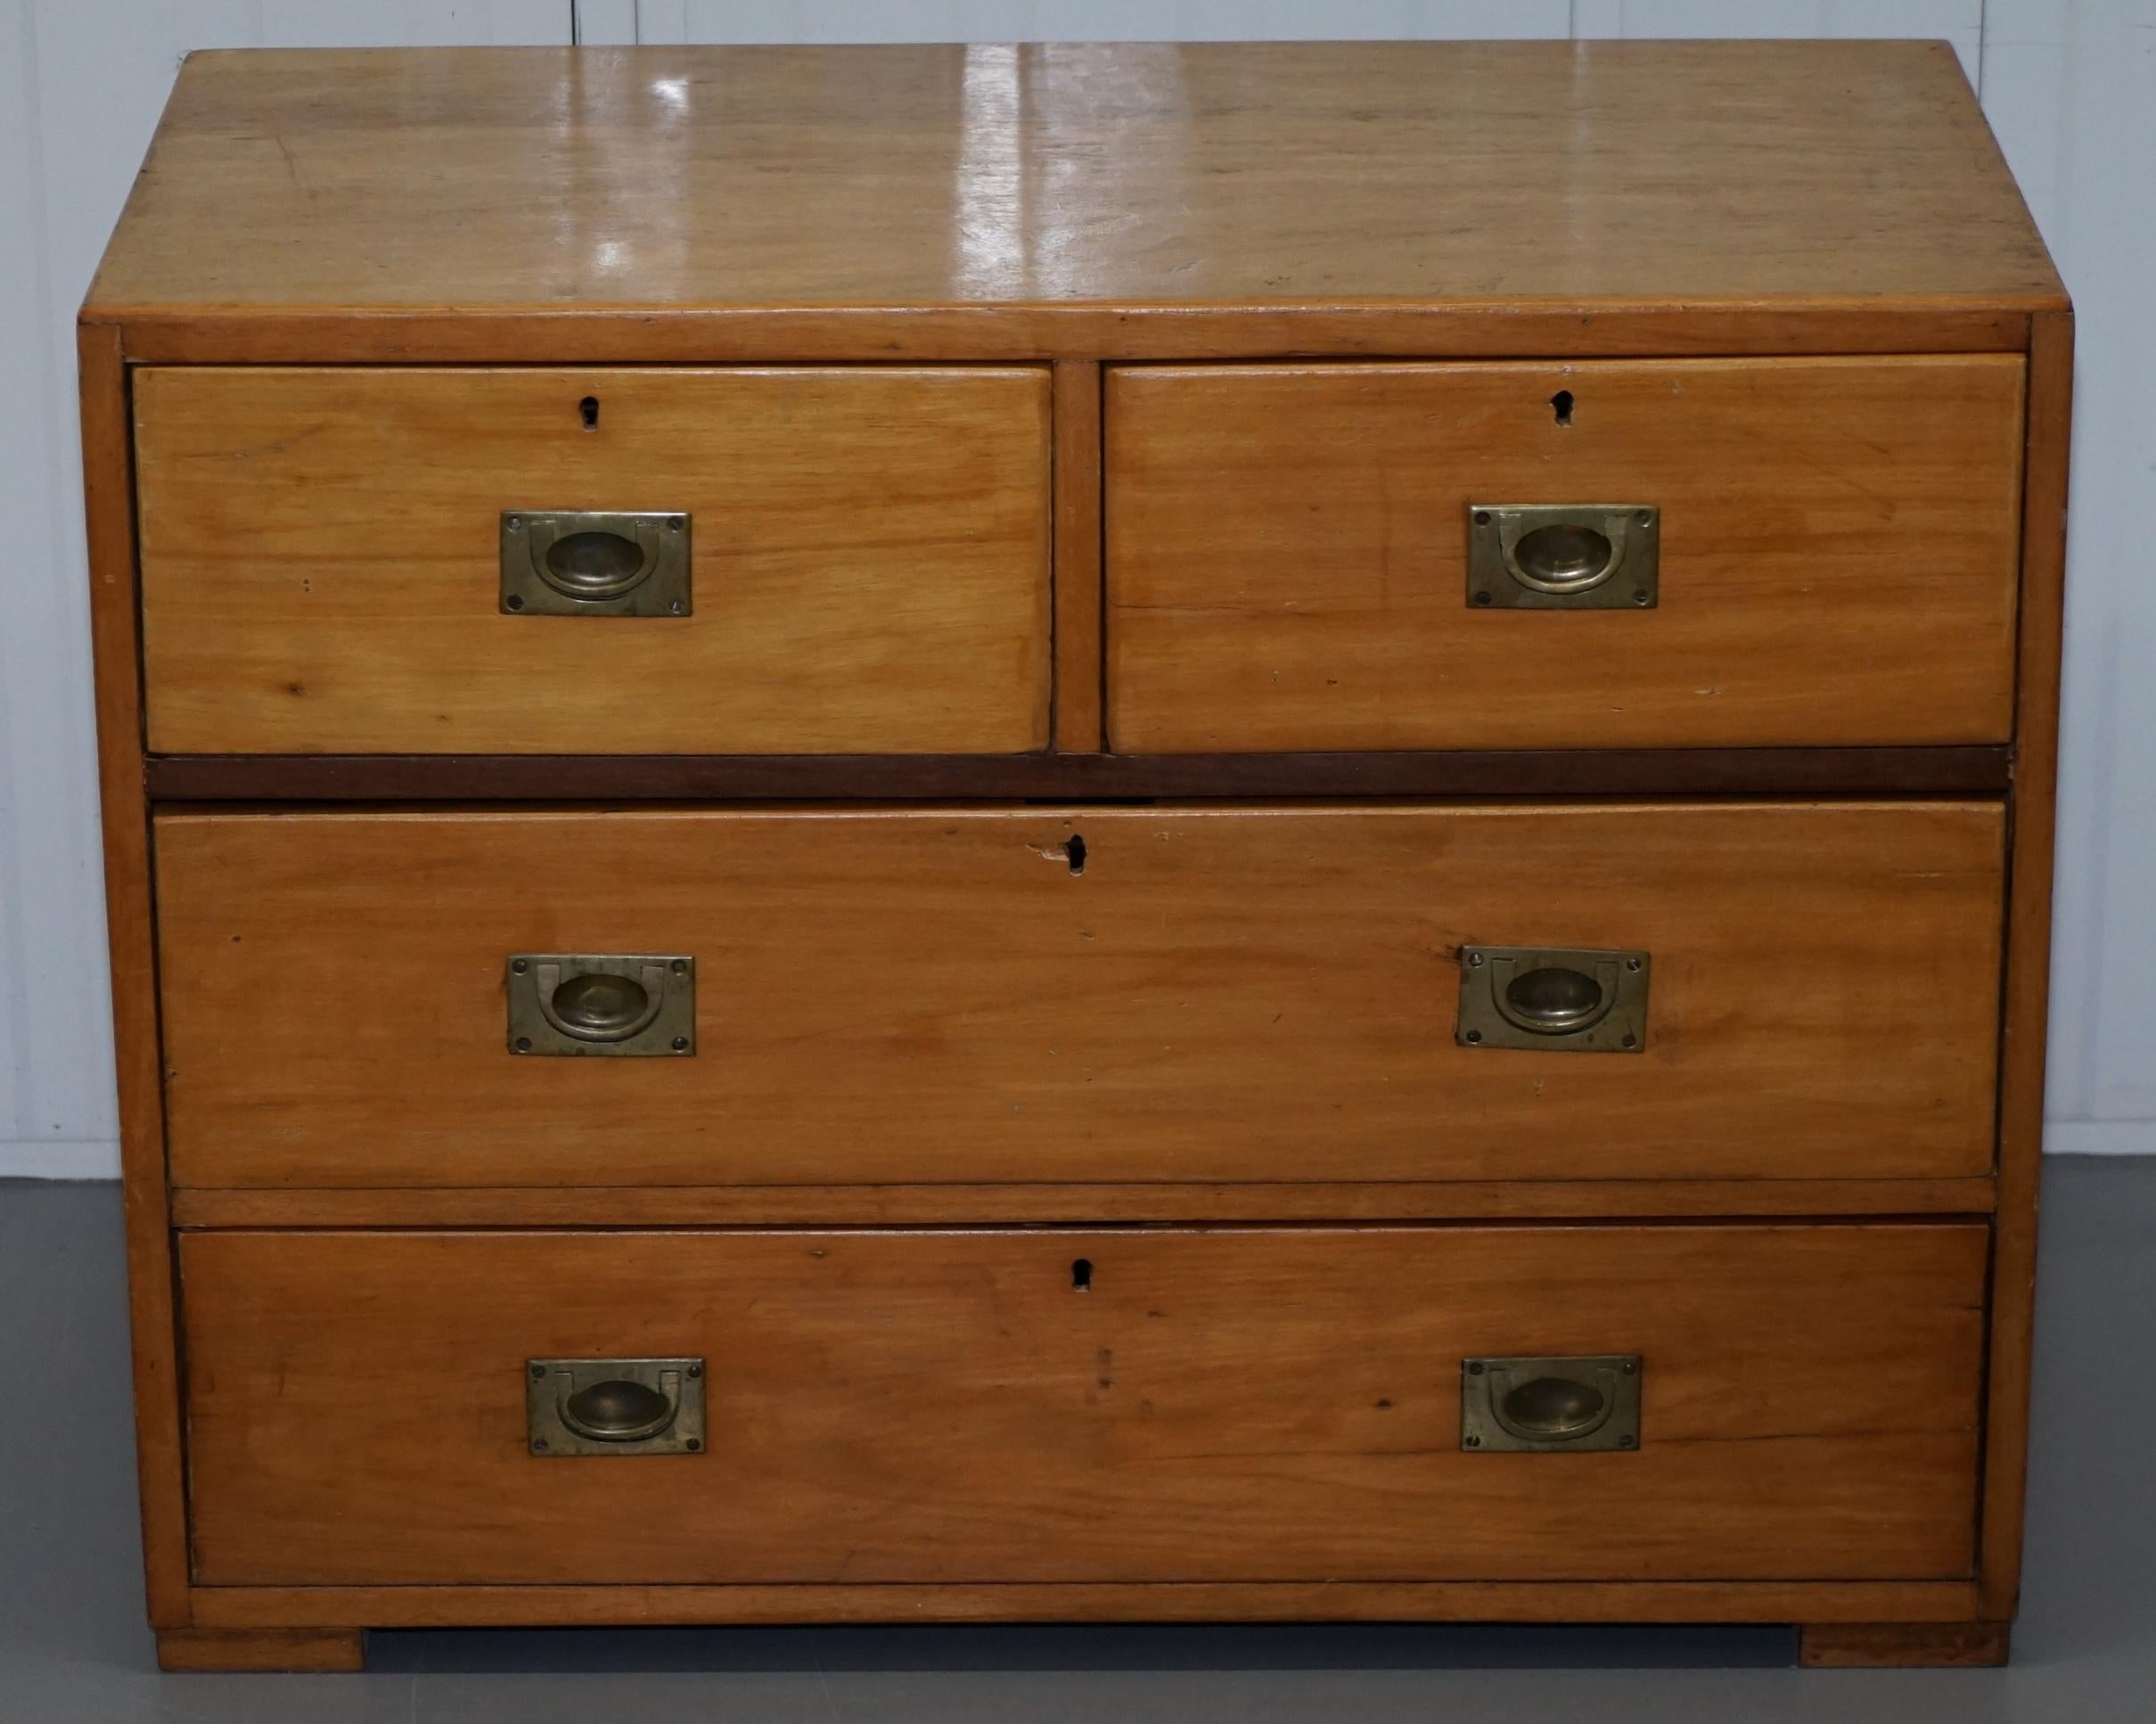 We are delighted to offer for sale one of two circa 1950’s Military Campaign chests of drawers

A very good looking and well made piece in light mahogany wood, I have one other the same model listed under my other items slightly smaller and in